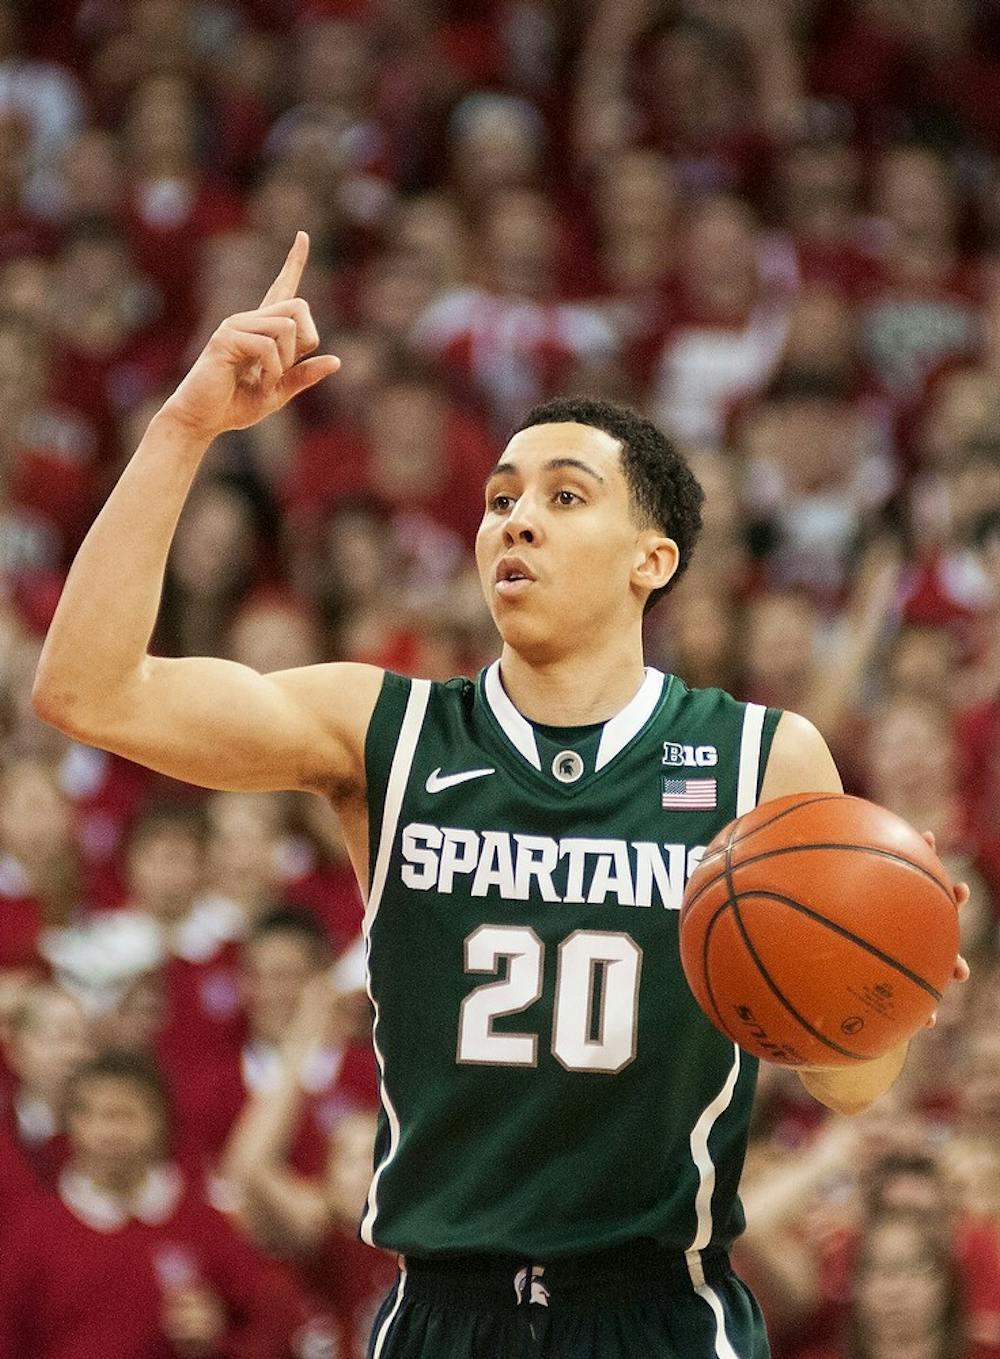 	<p>Junior guard Travis Trice motions to teammates during the game against Wisconsin on Feb. 9, 2014, at Kohl Center in Madison, Wis. The Spartans lost to the Badgers, 60-58. Danyelle Morrow/The State News</p>